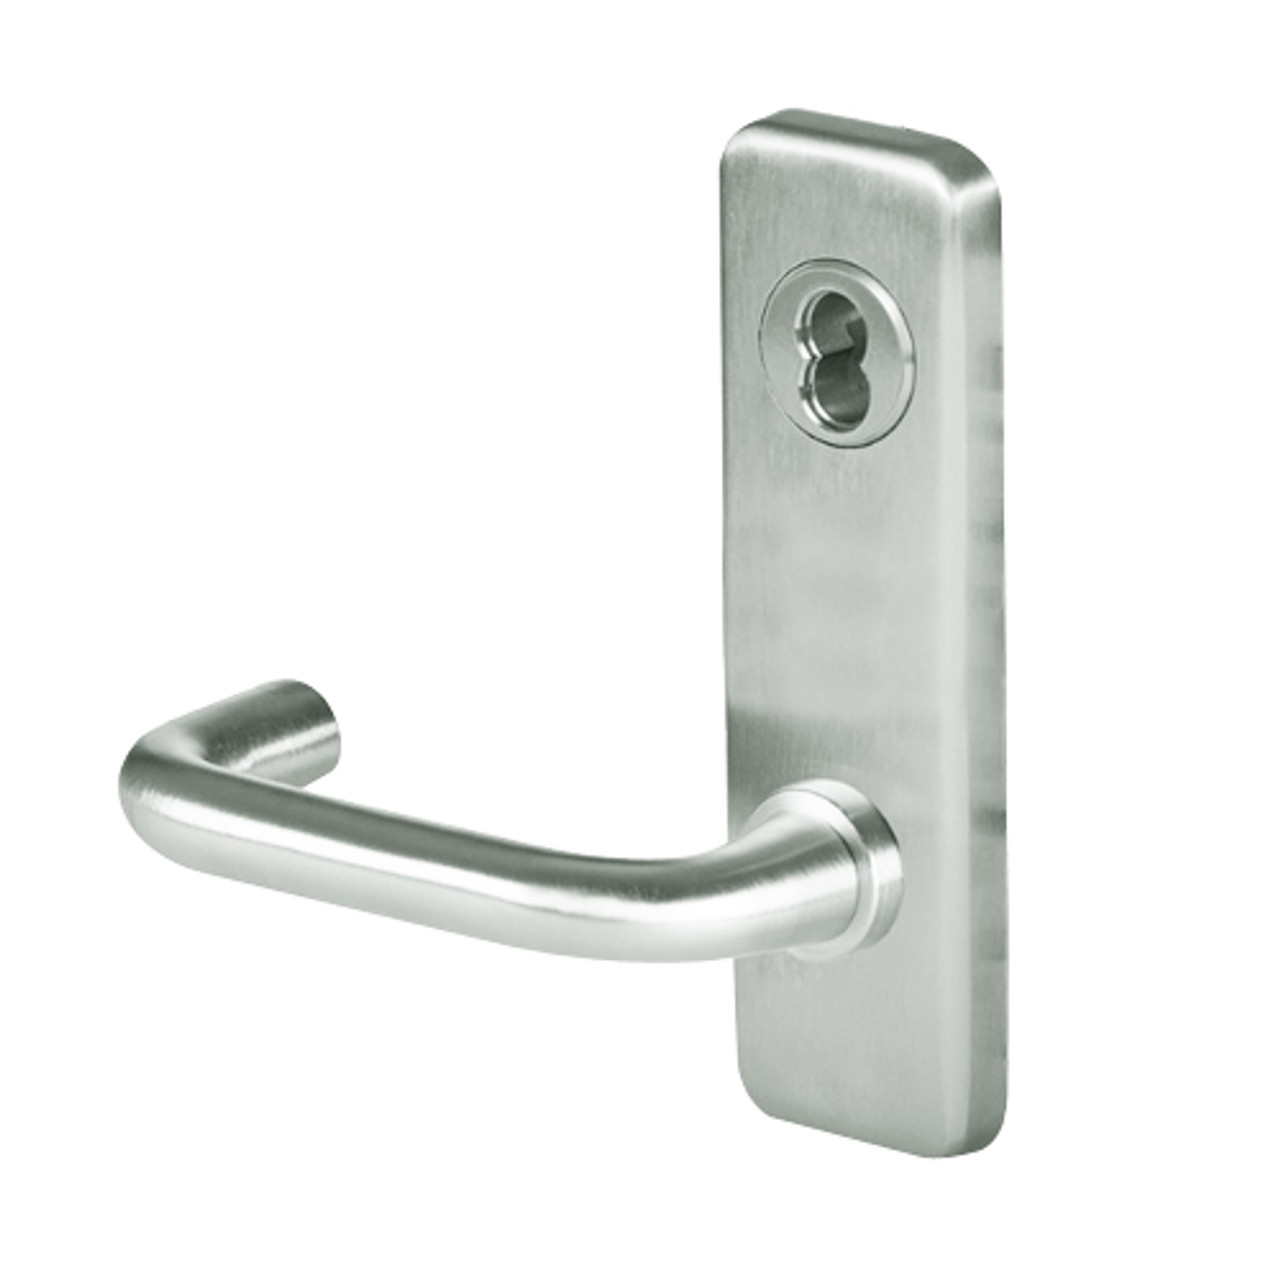 45H0NX3J618 Best 40H Series Exit Function Heavy Duty Mortise Lever Lock with Solid Tube Return Style in Bright Nickel